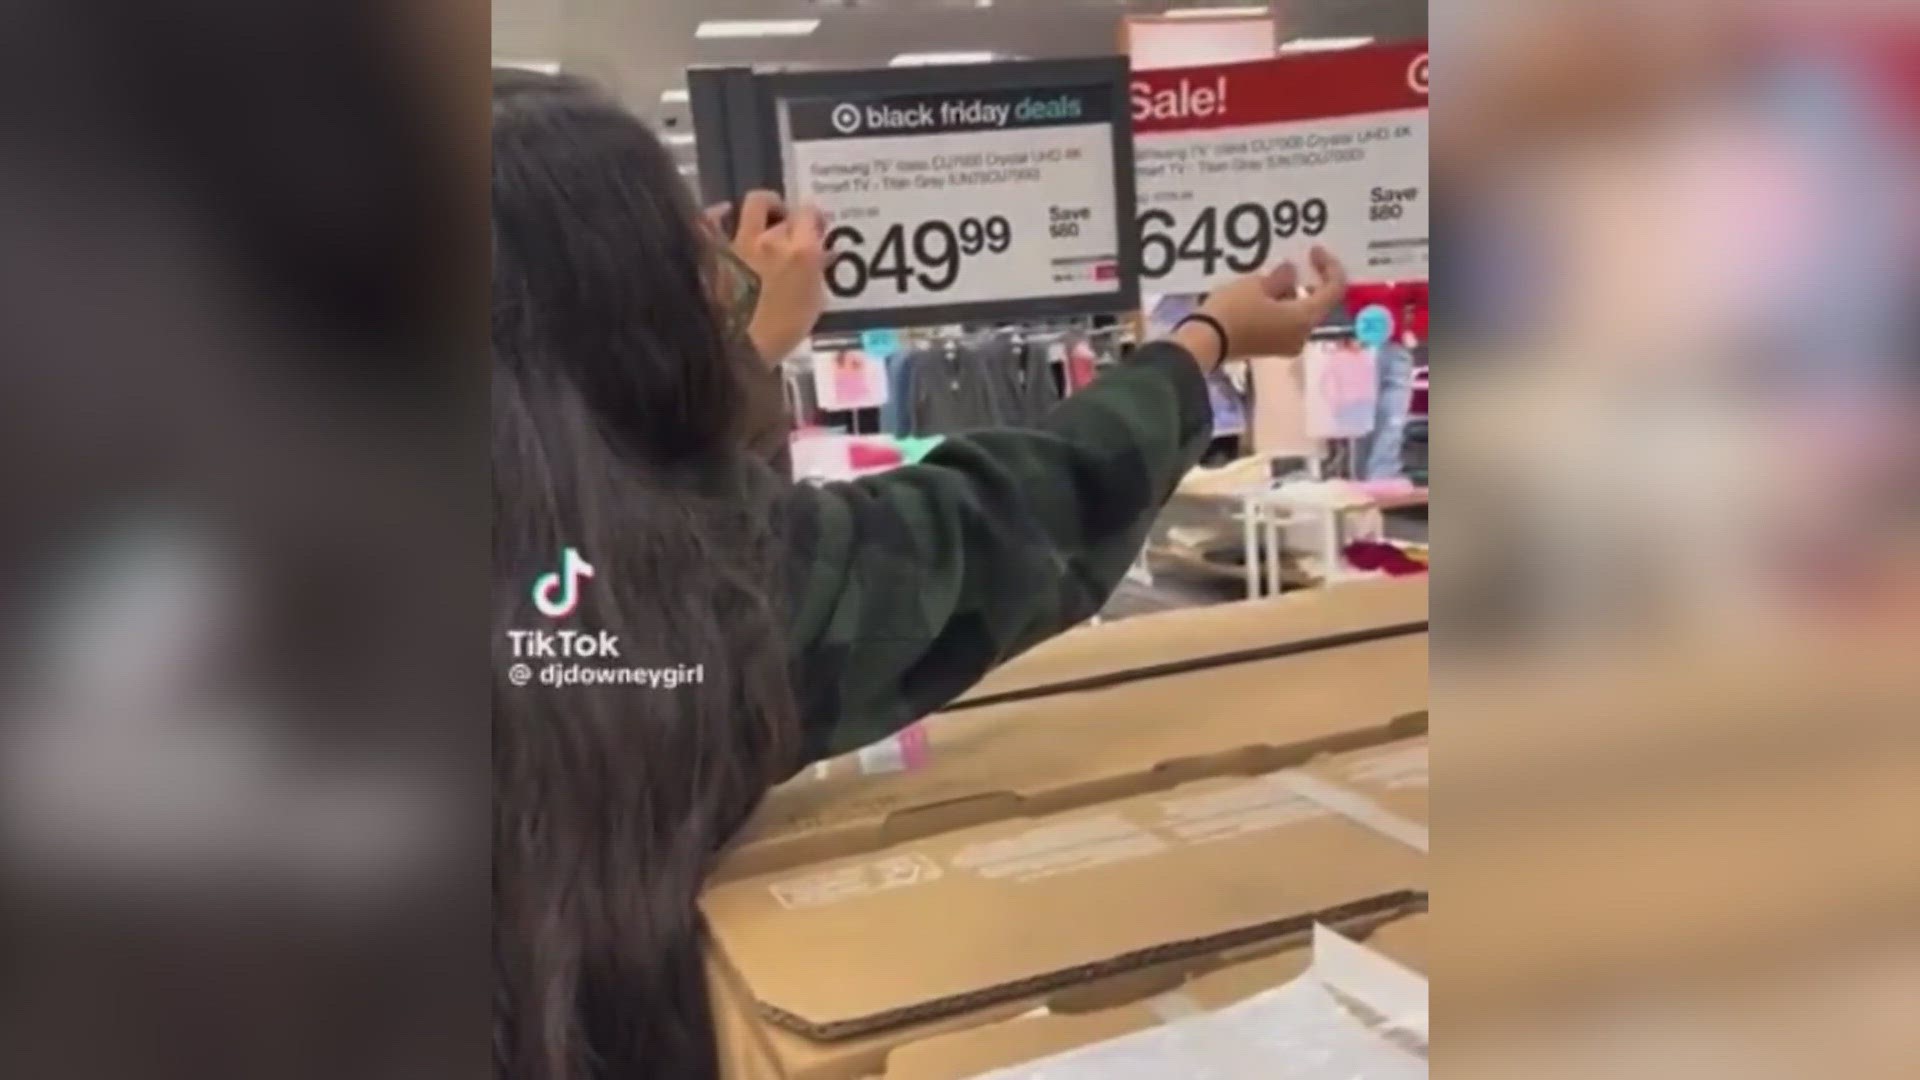 Target responds to backlash following video of Black Friday deals